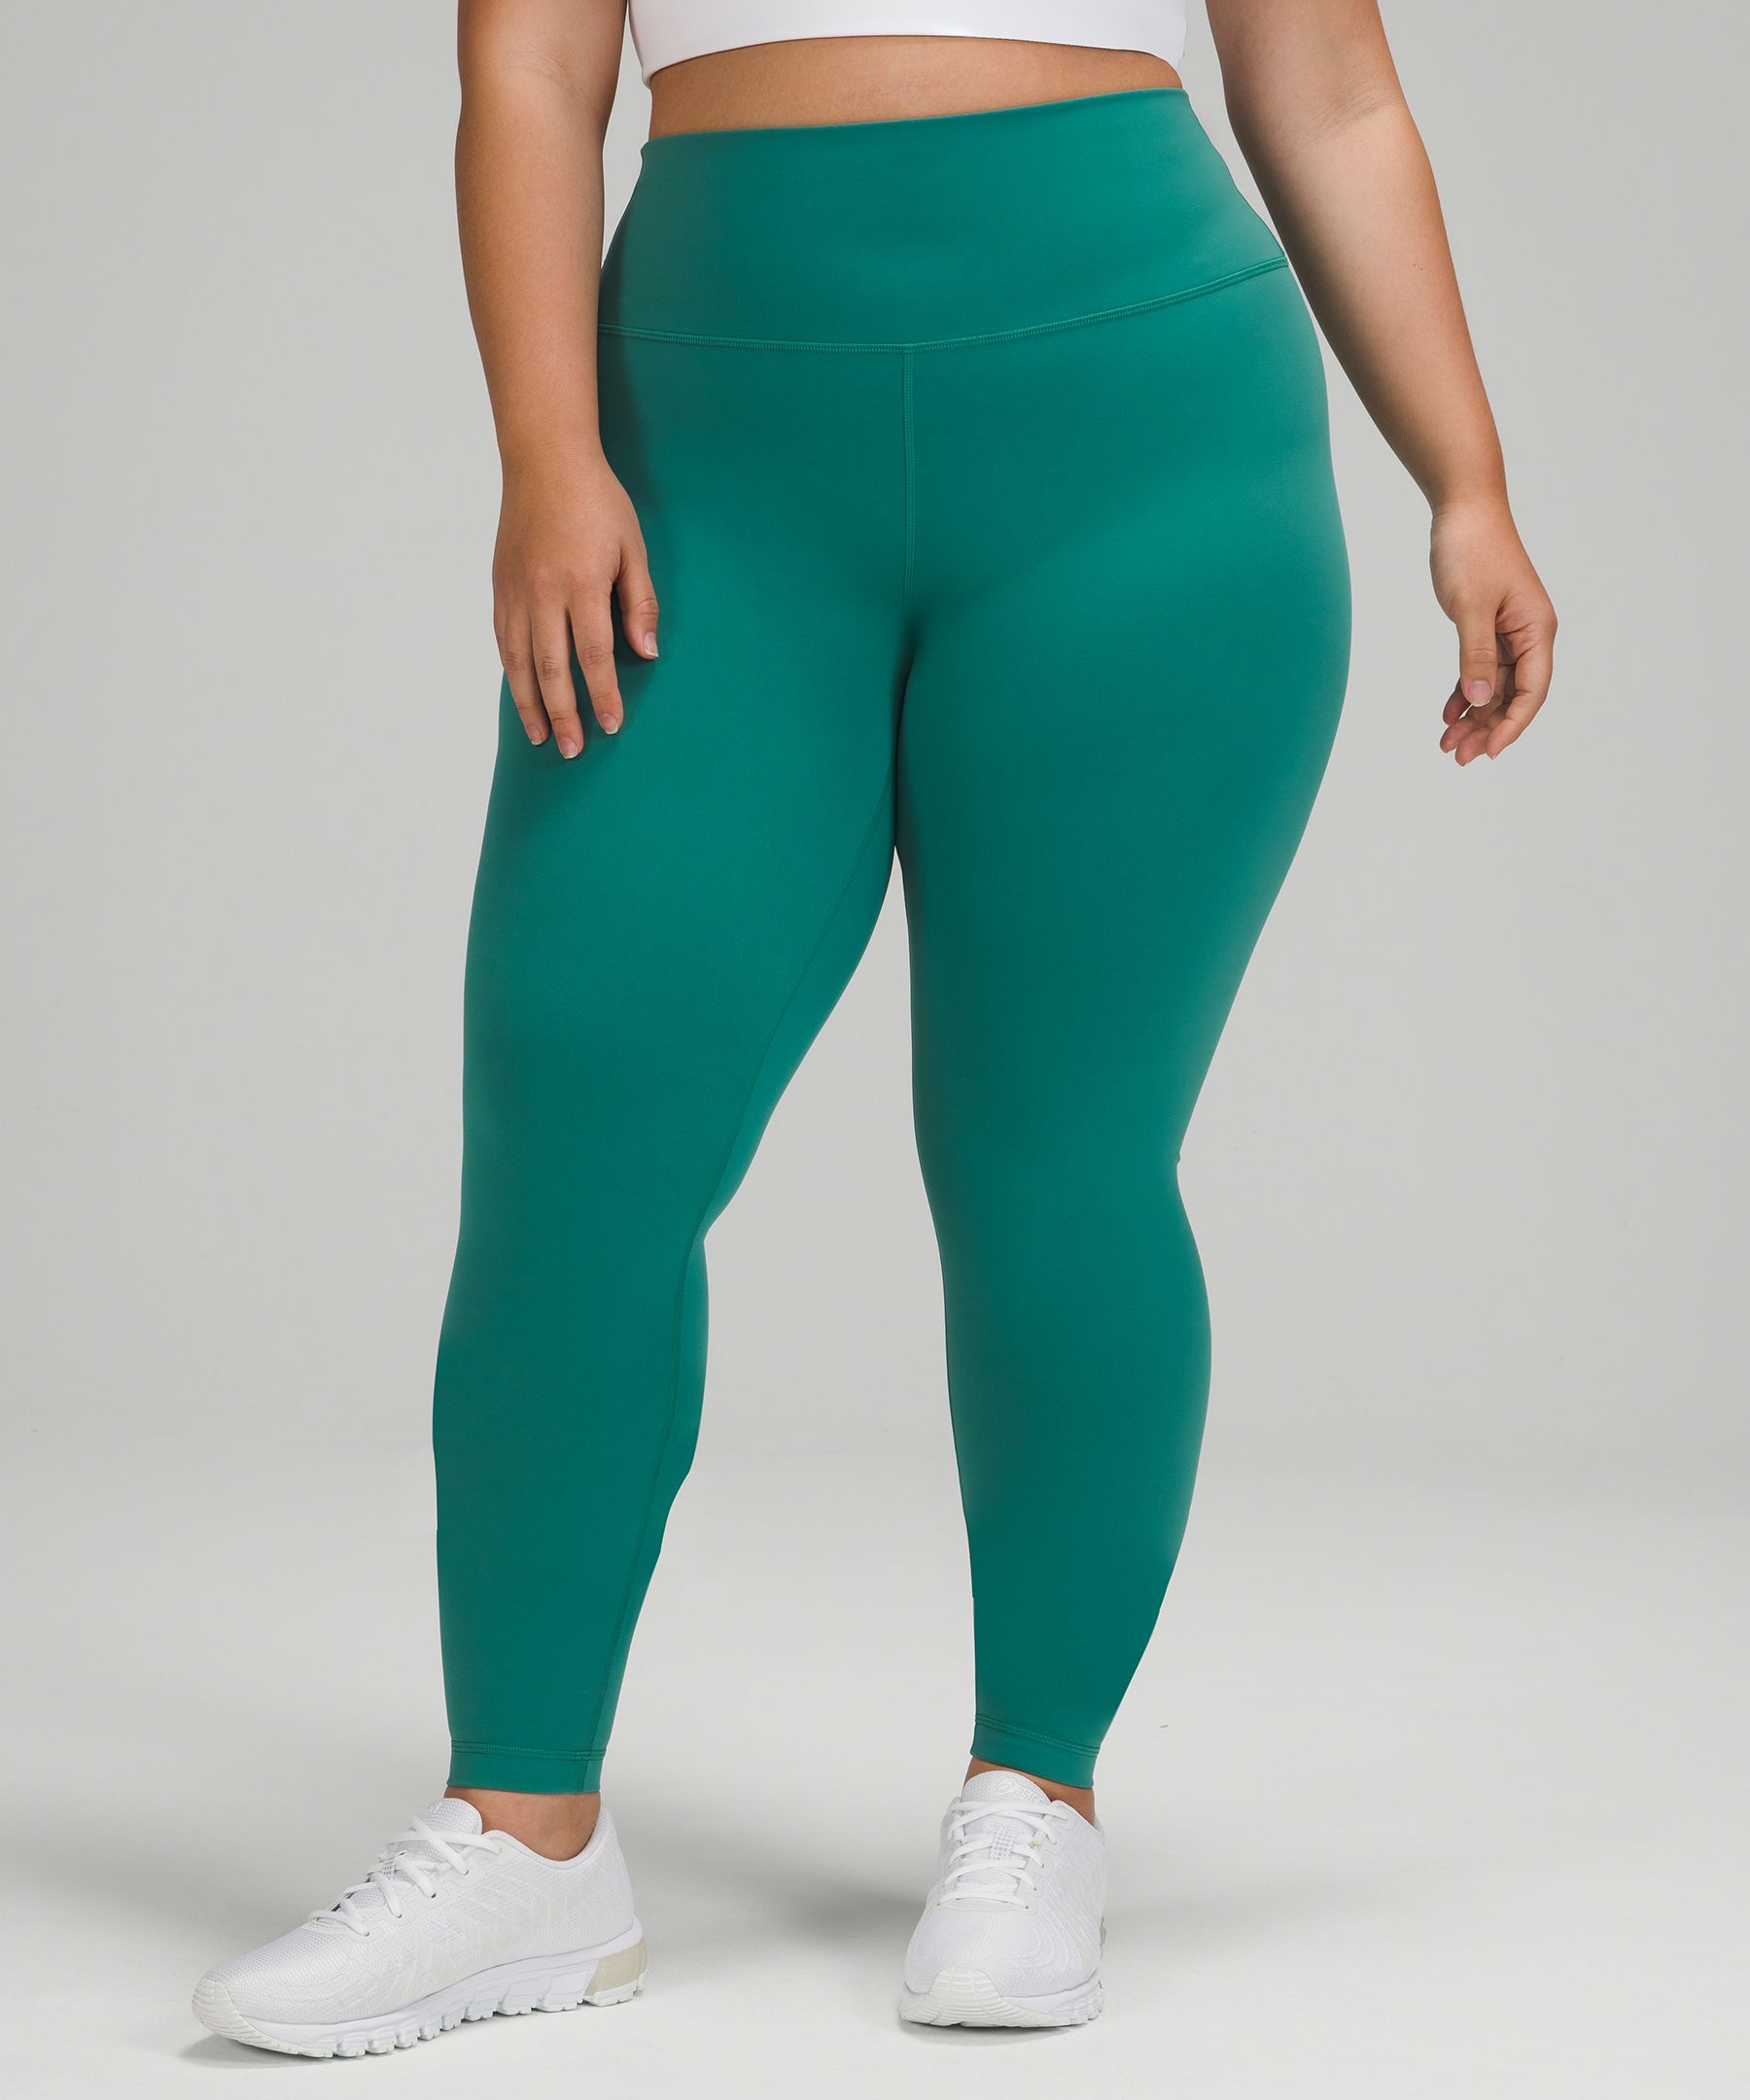 Lululemon Wunder Train High-rise Tights 28" In Teal Lagoon